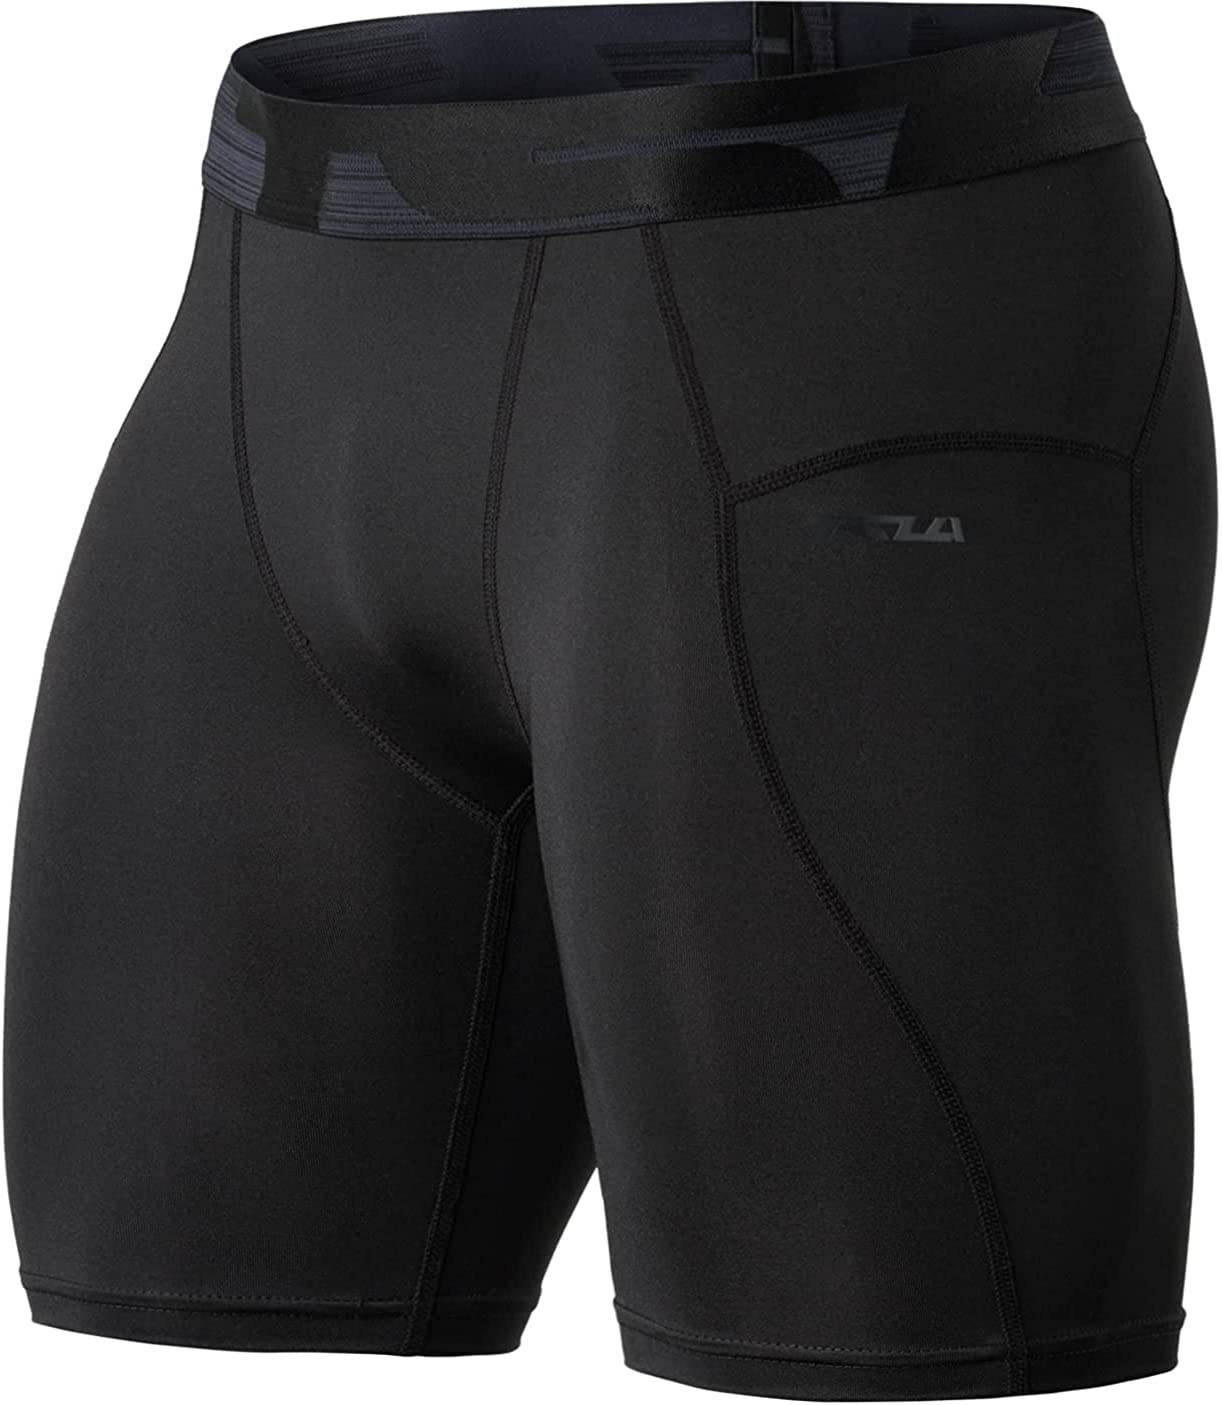 TSLA Men's Athletic Compression Shorts, Sports Performance Active Cool Dry  Running Tights